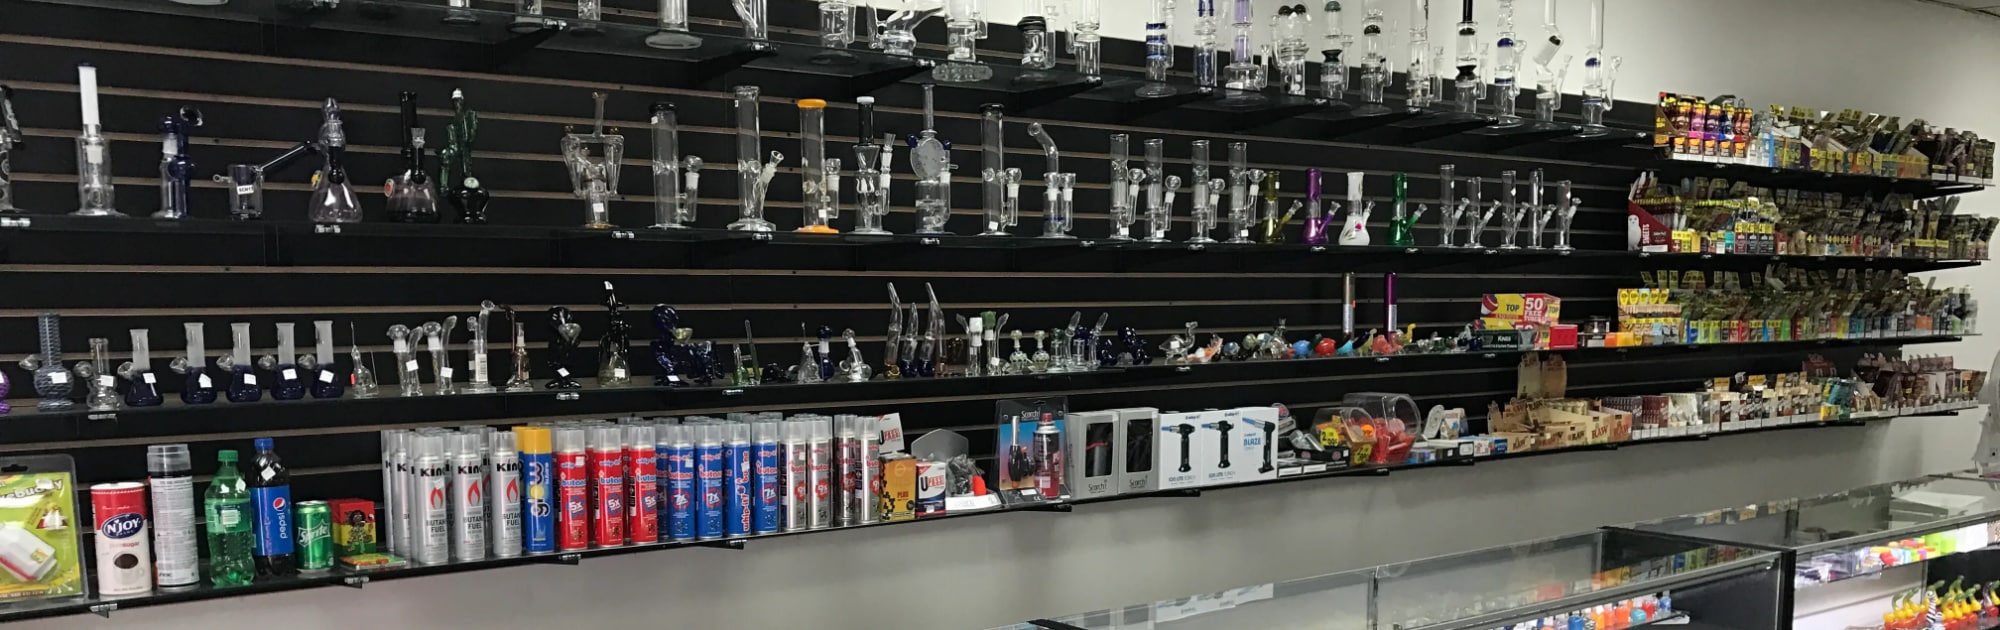 image of sweet southern vapes in kenner la